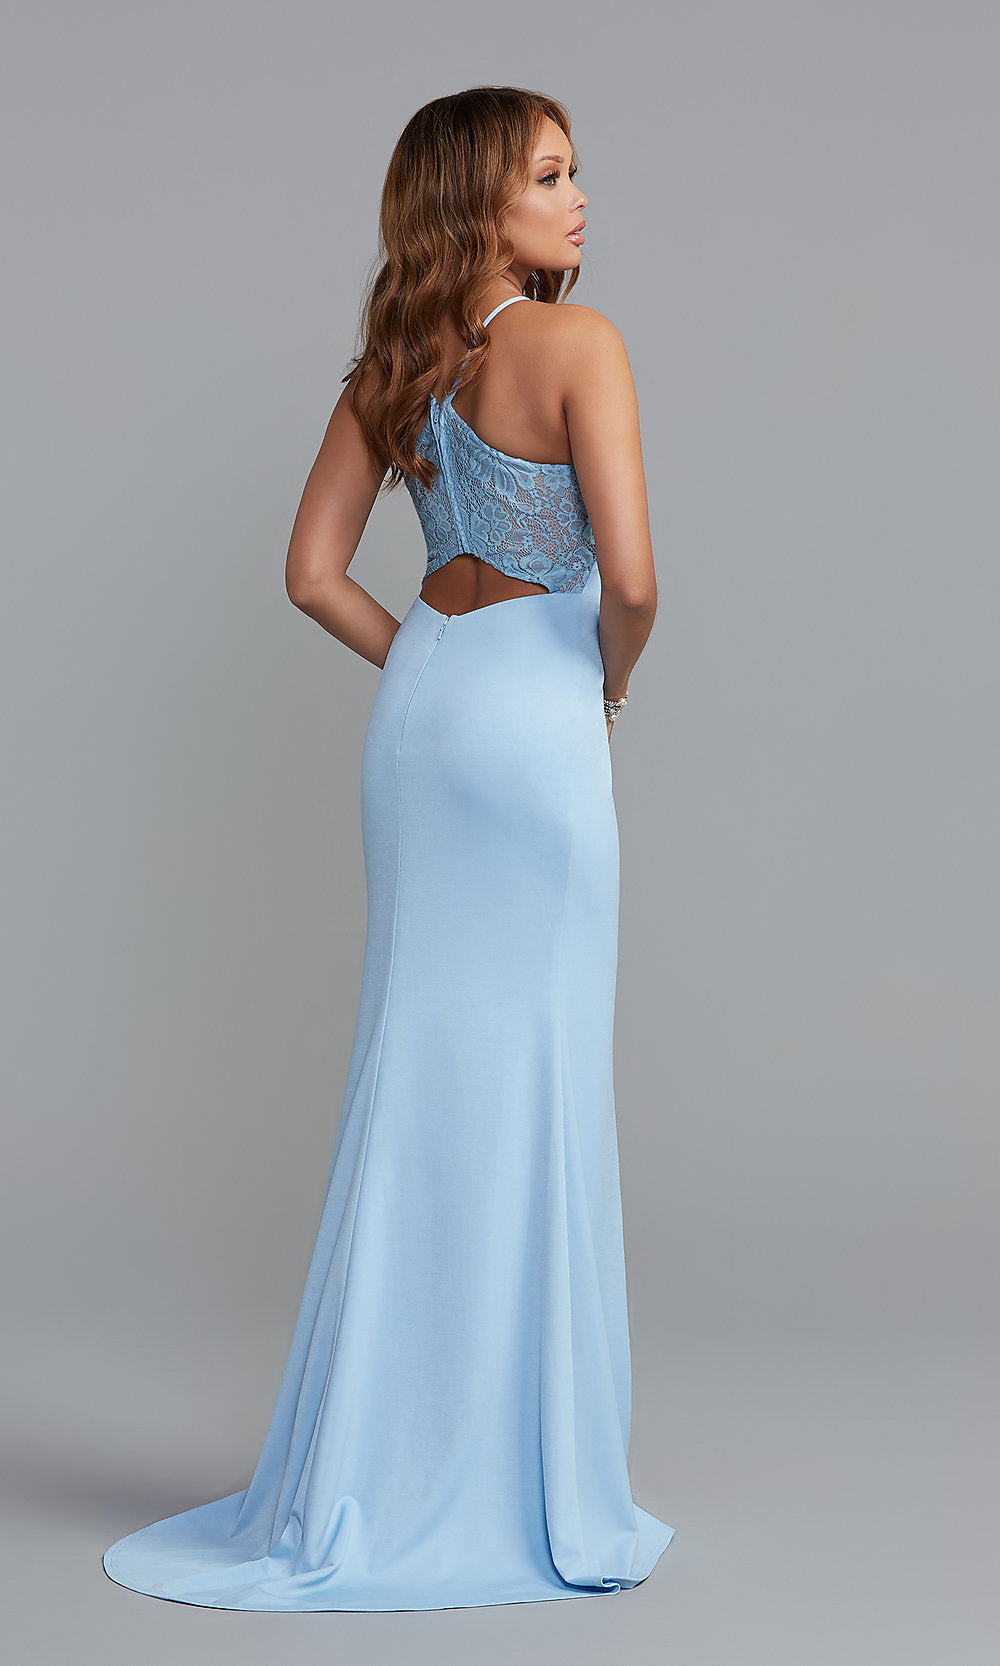  High-Neck Long Formal Prom Dress with Lace Back